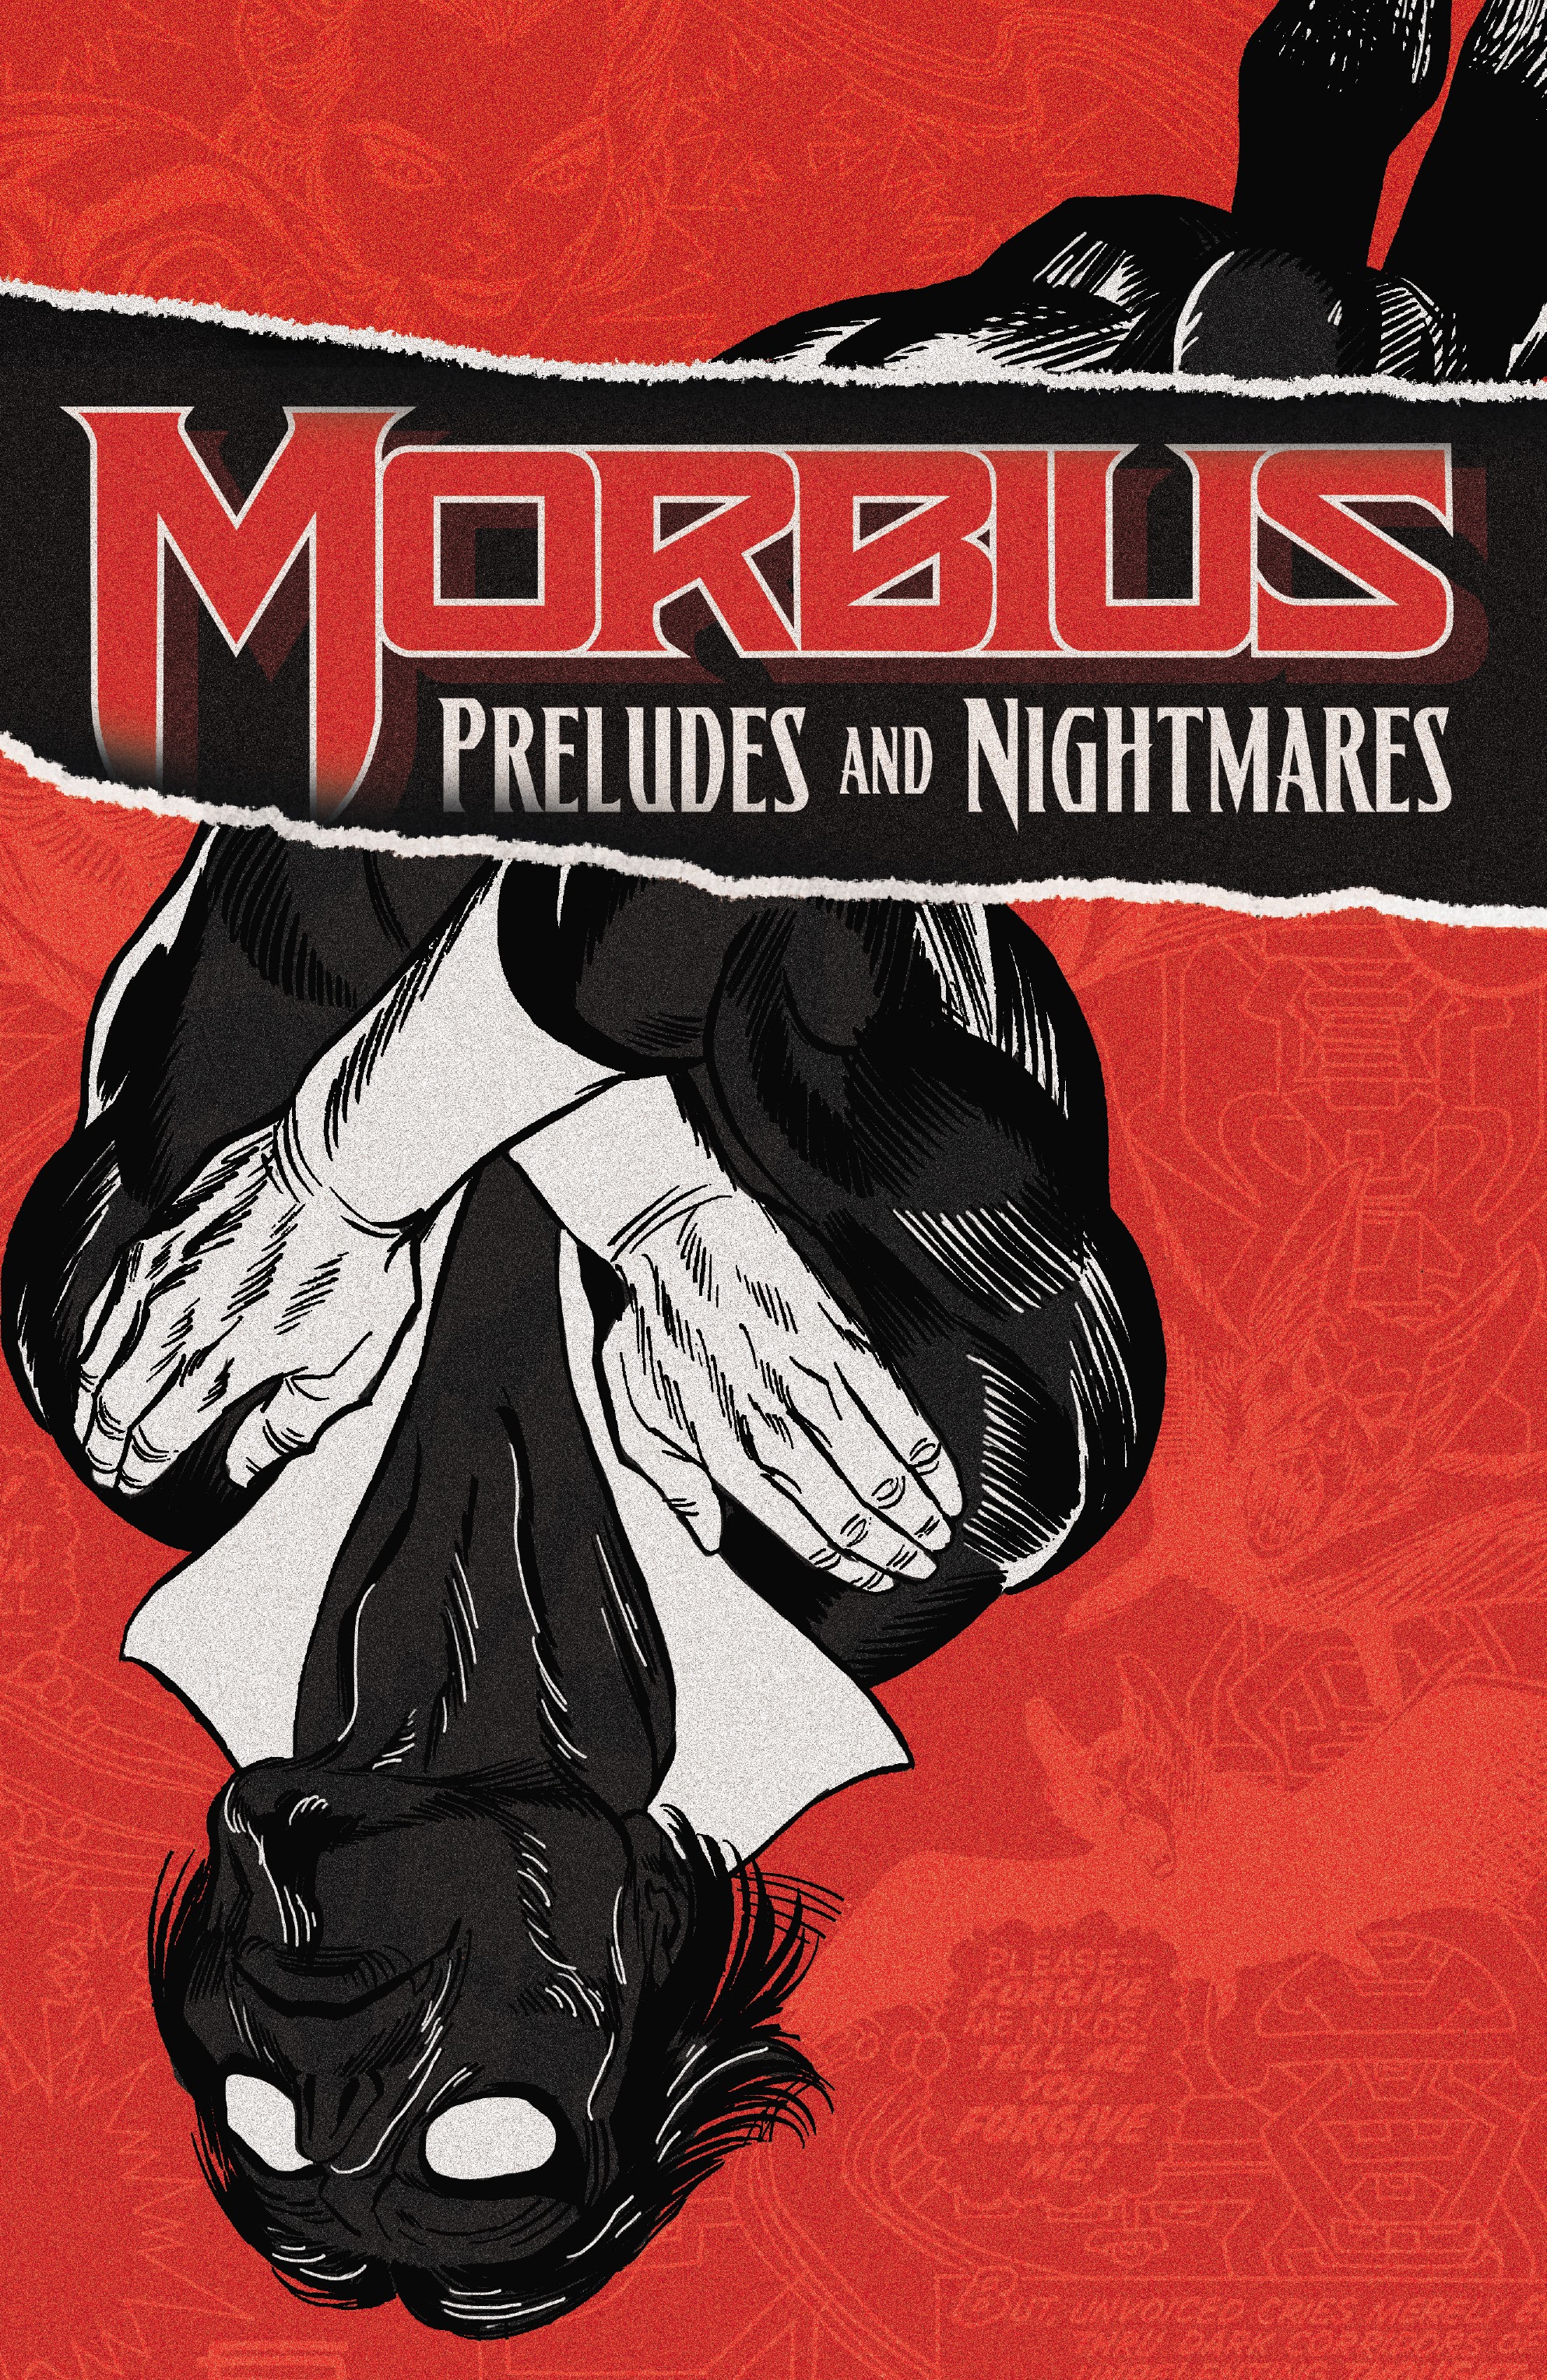 Read online Morbius: Preludes and Nightmares comic -  Issue # TPB - 2